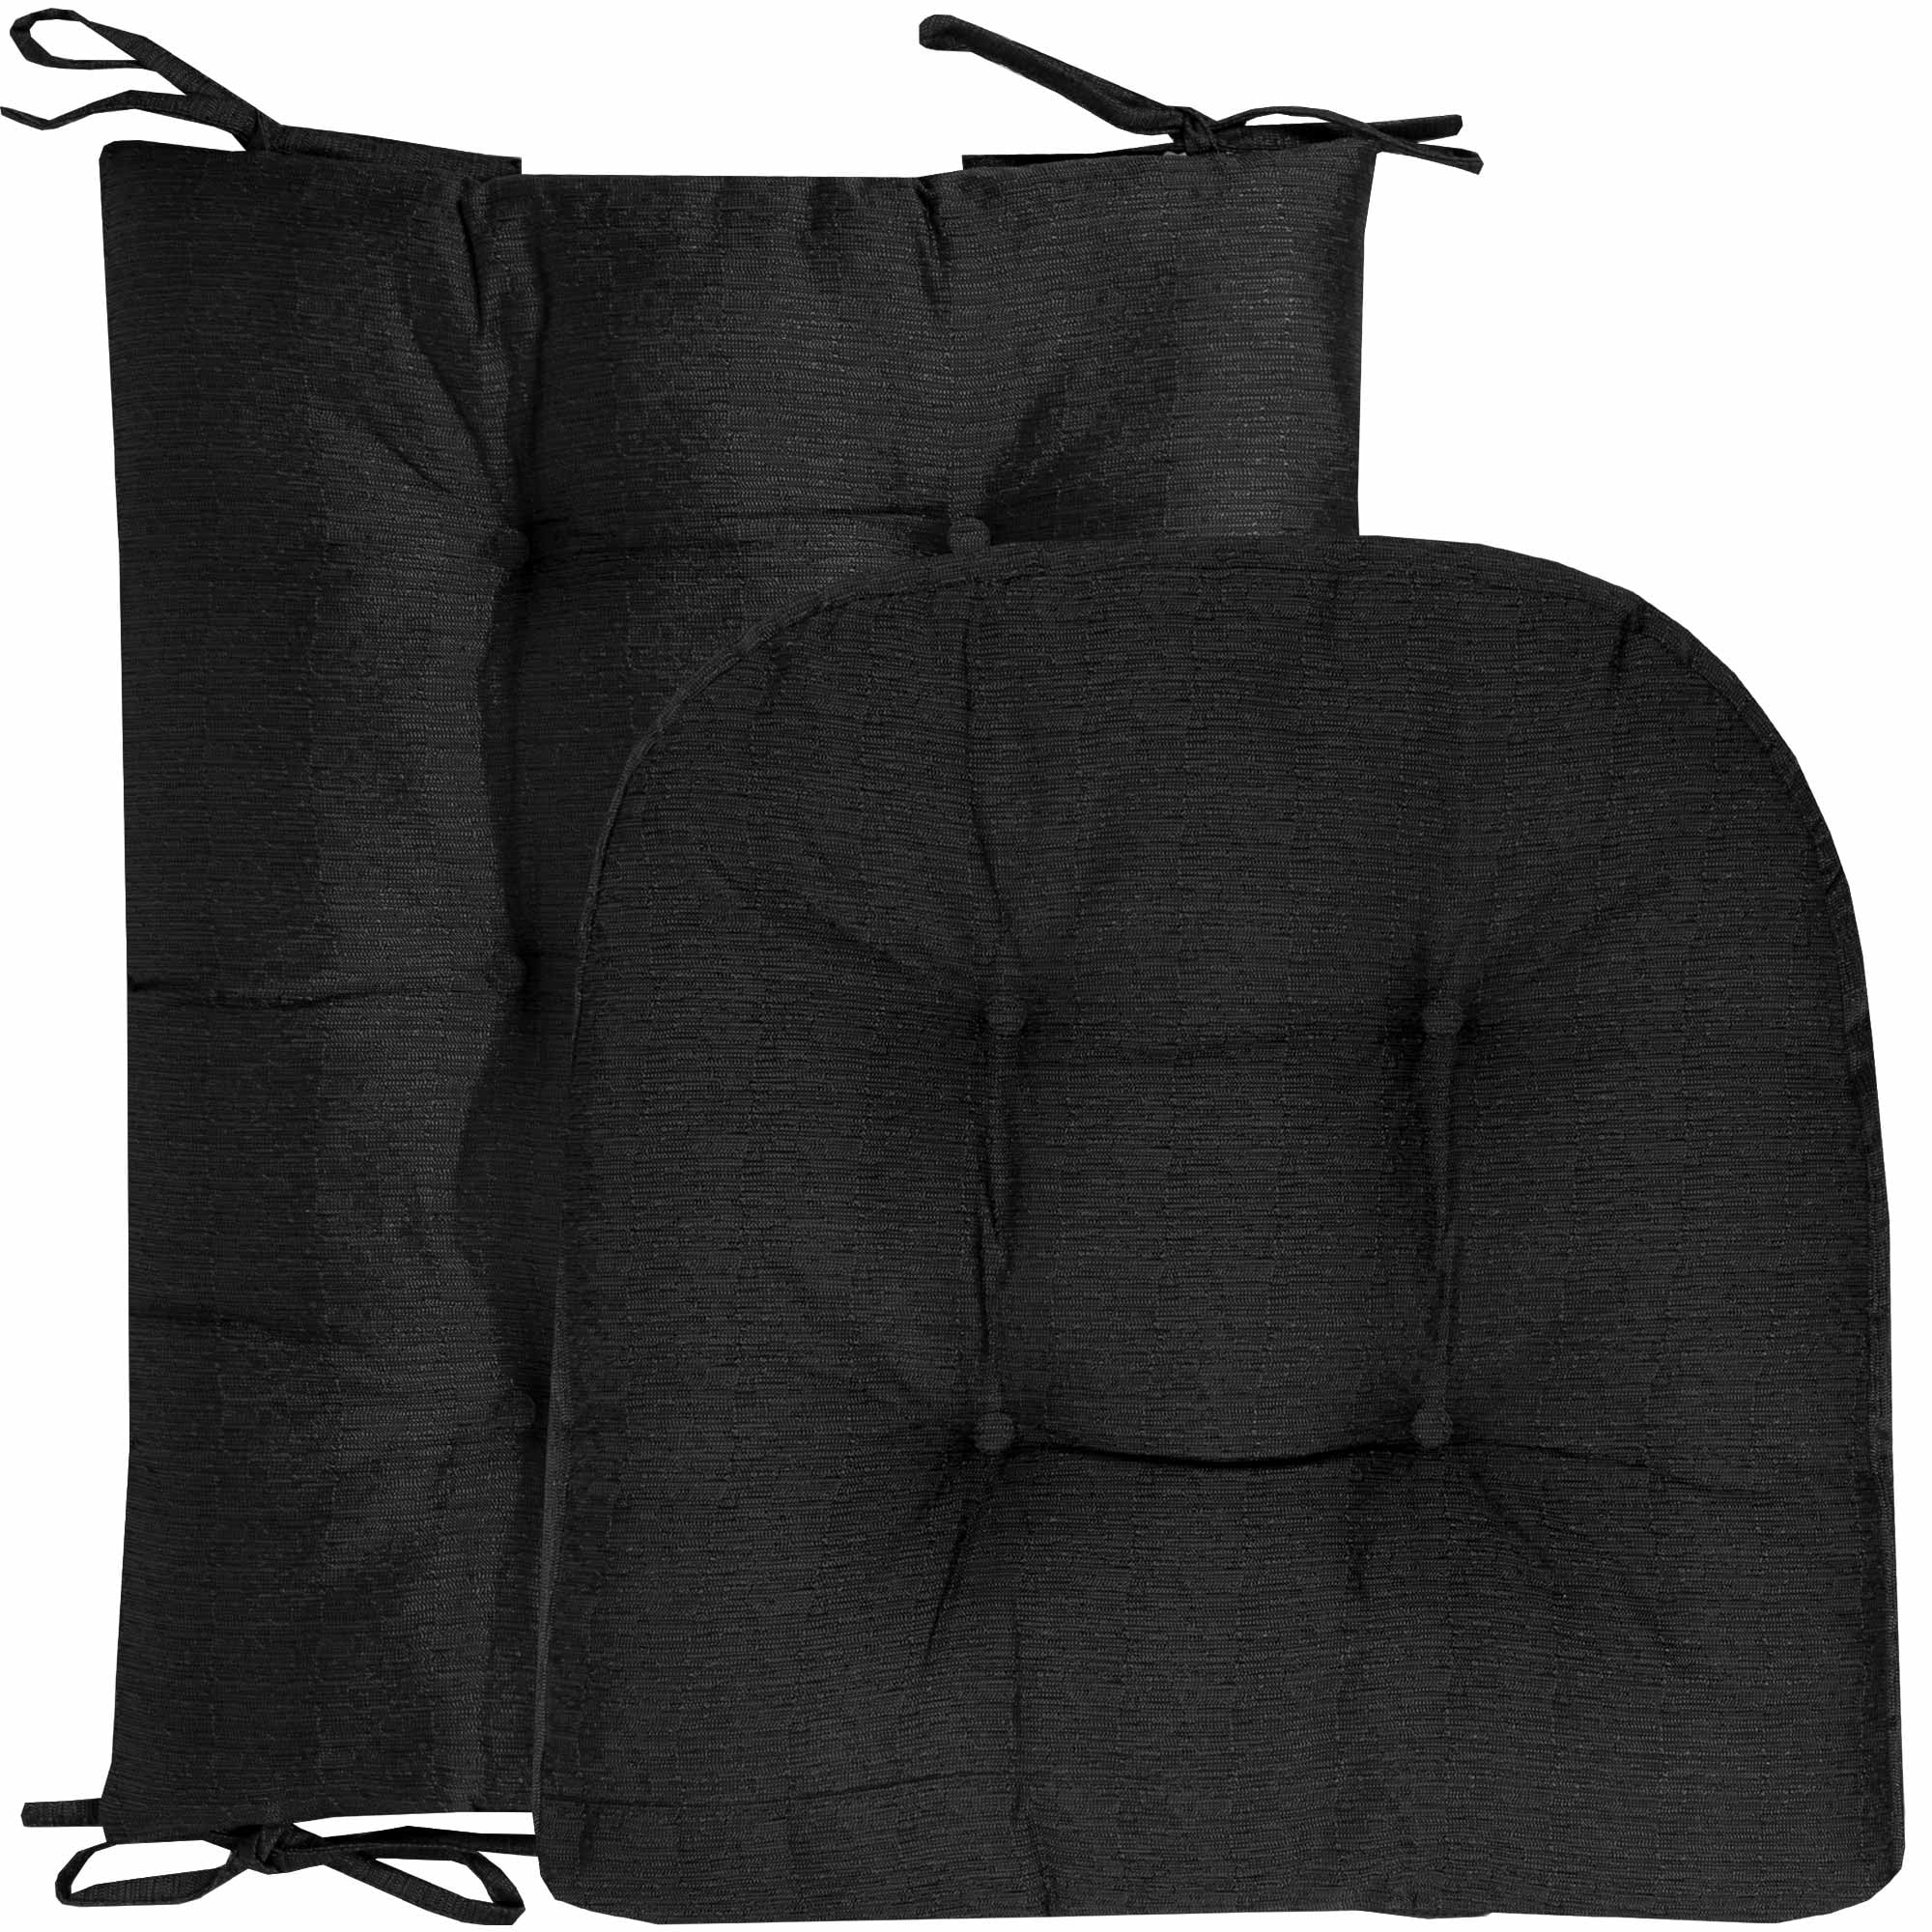 YEERSWAG 47X19 inch Recliner Cushion Thickened Double-Sided Rocking Chair  Cushion Nap Folding Chair Padded